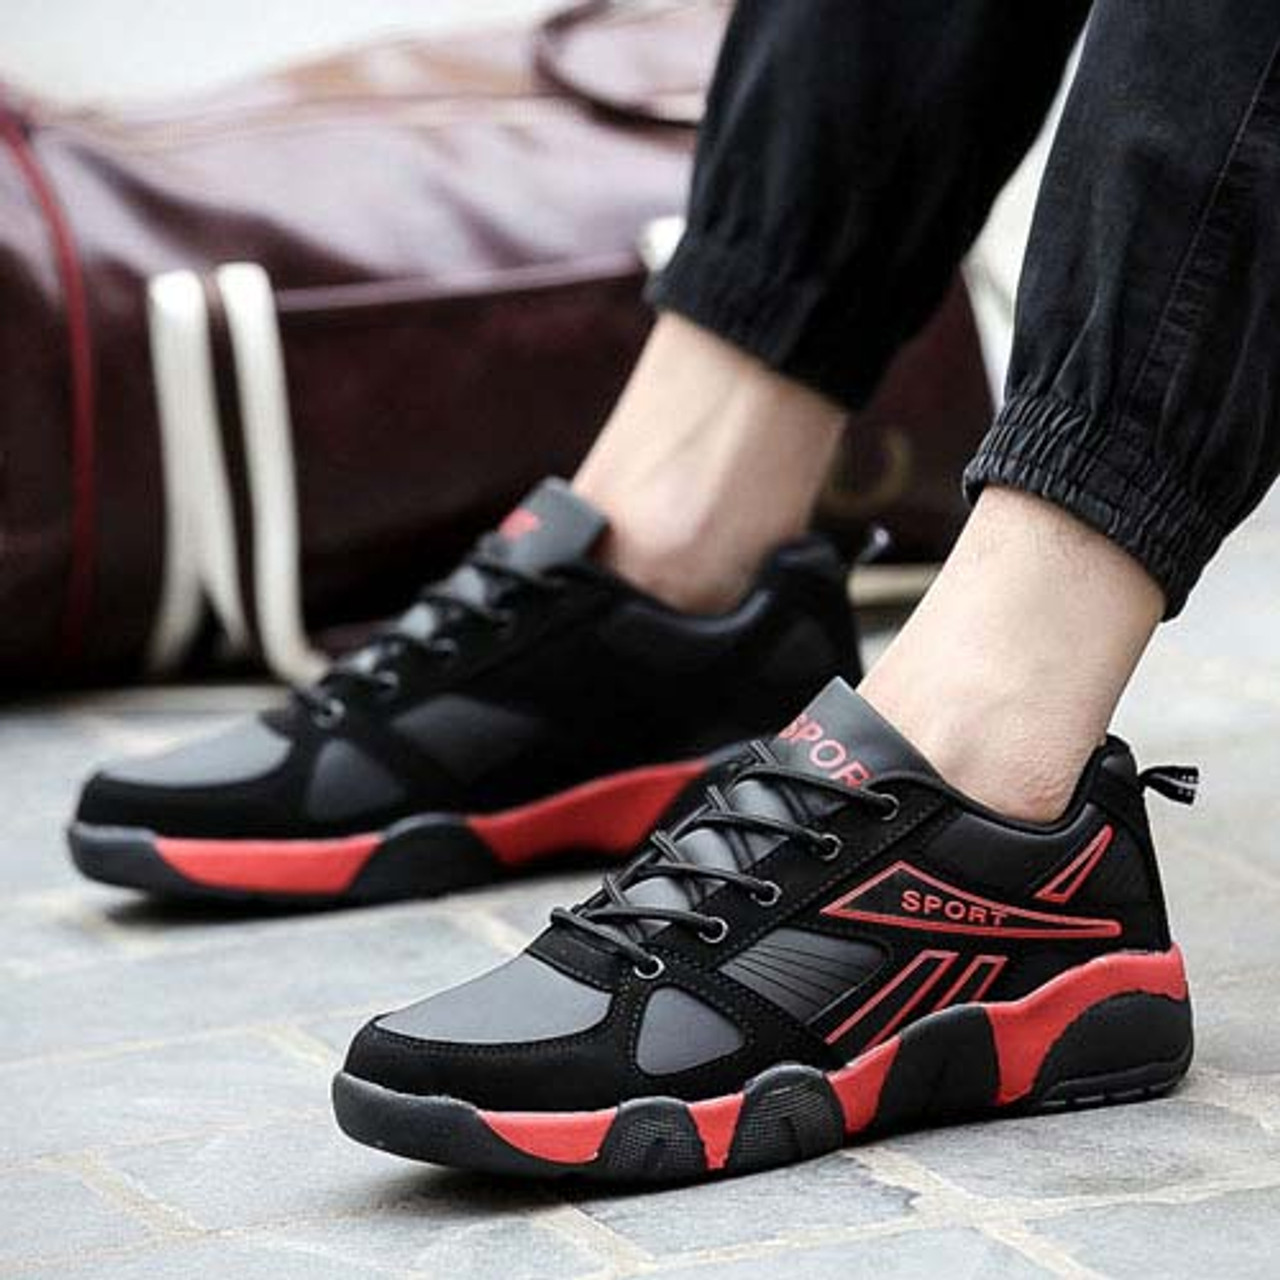 Black red pattern print leather lace up shoe sneaker | Mens shoes ...